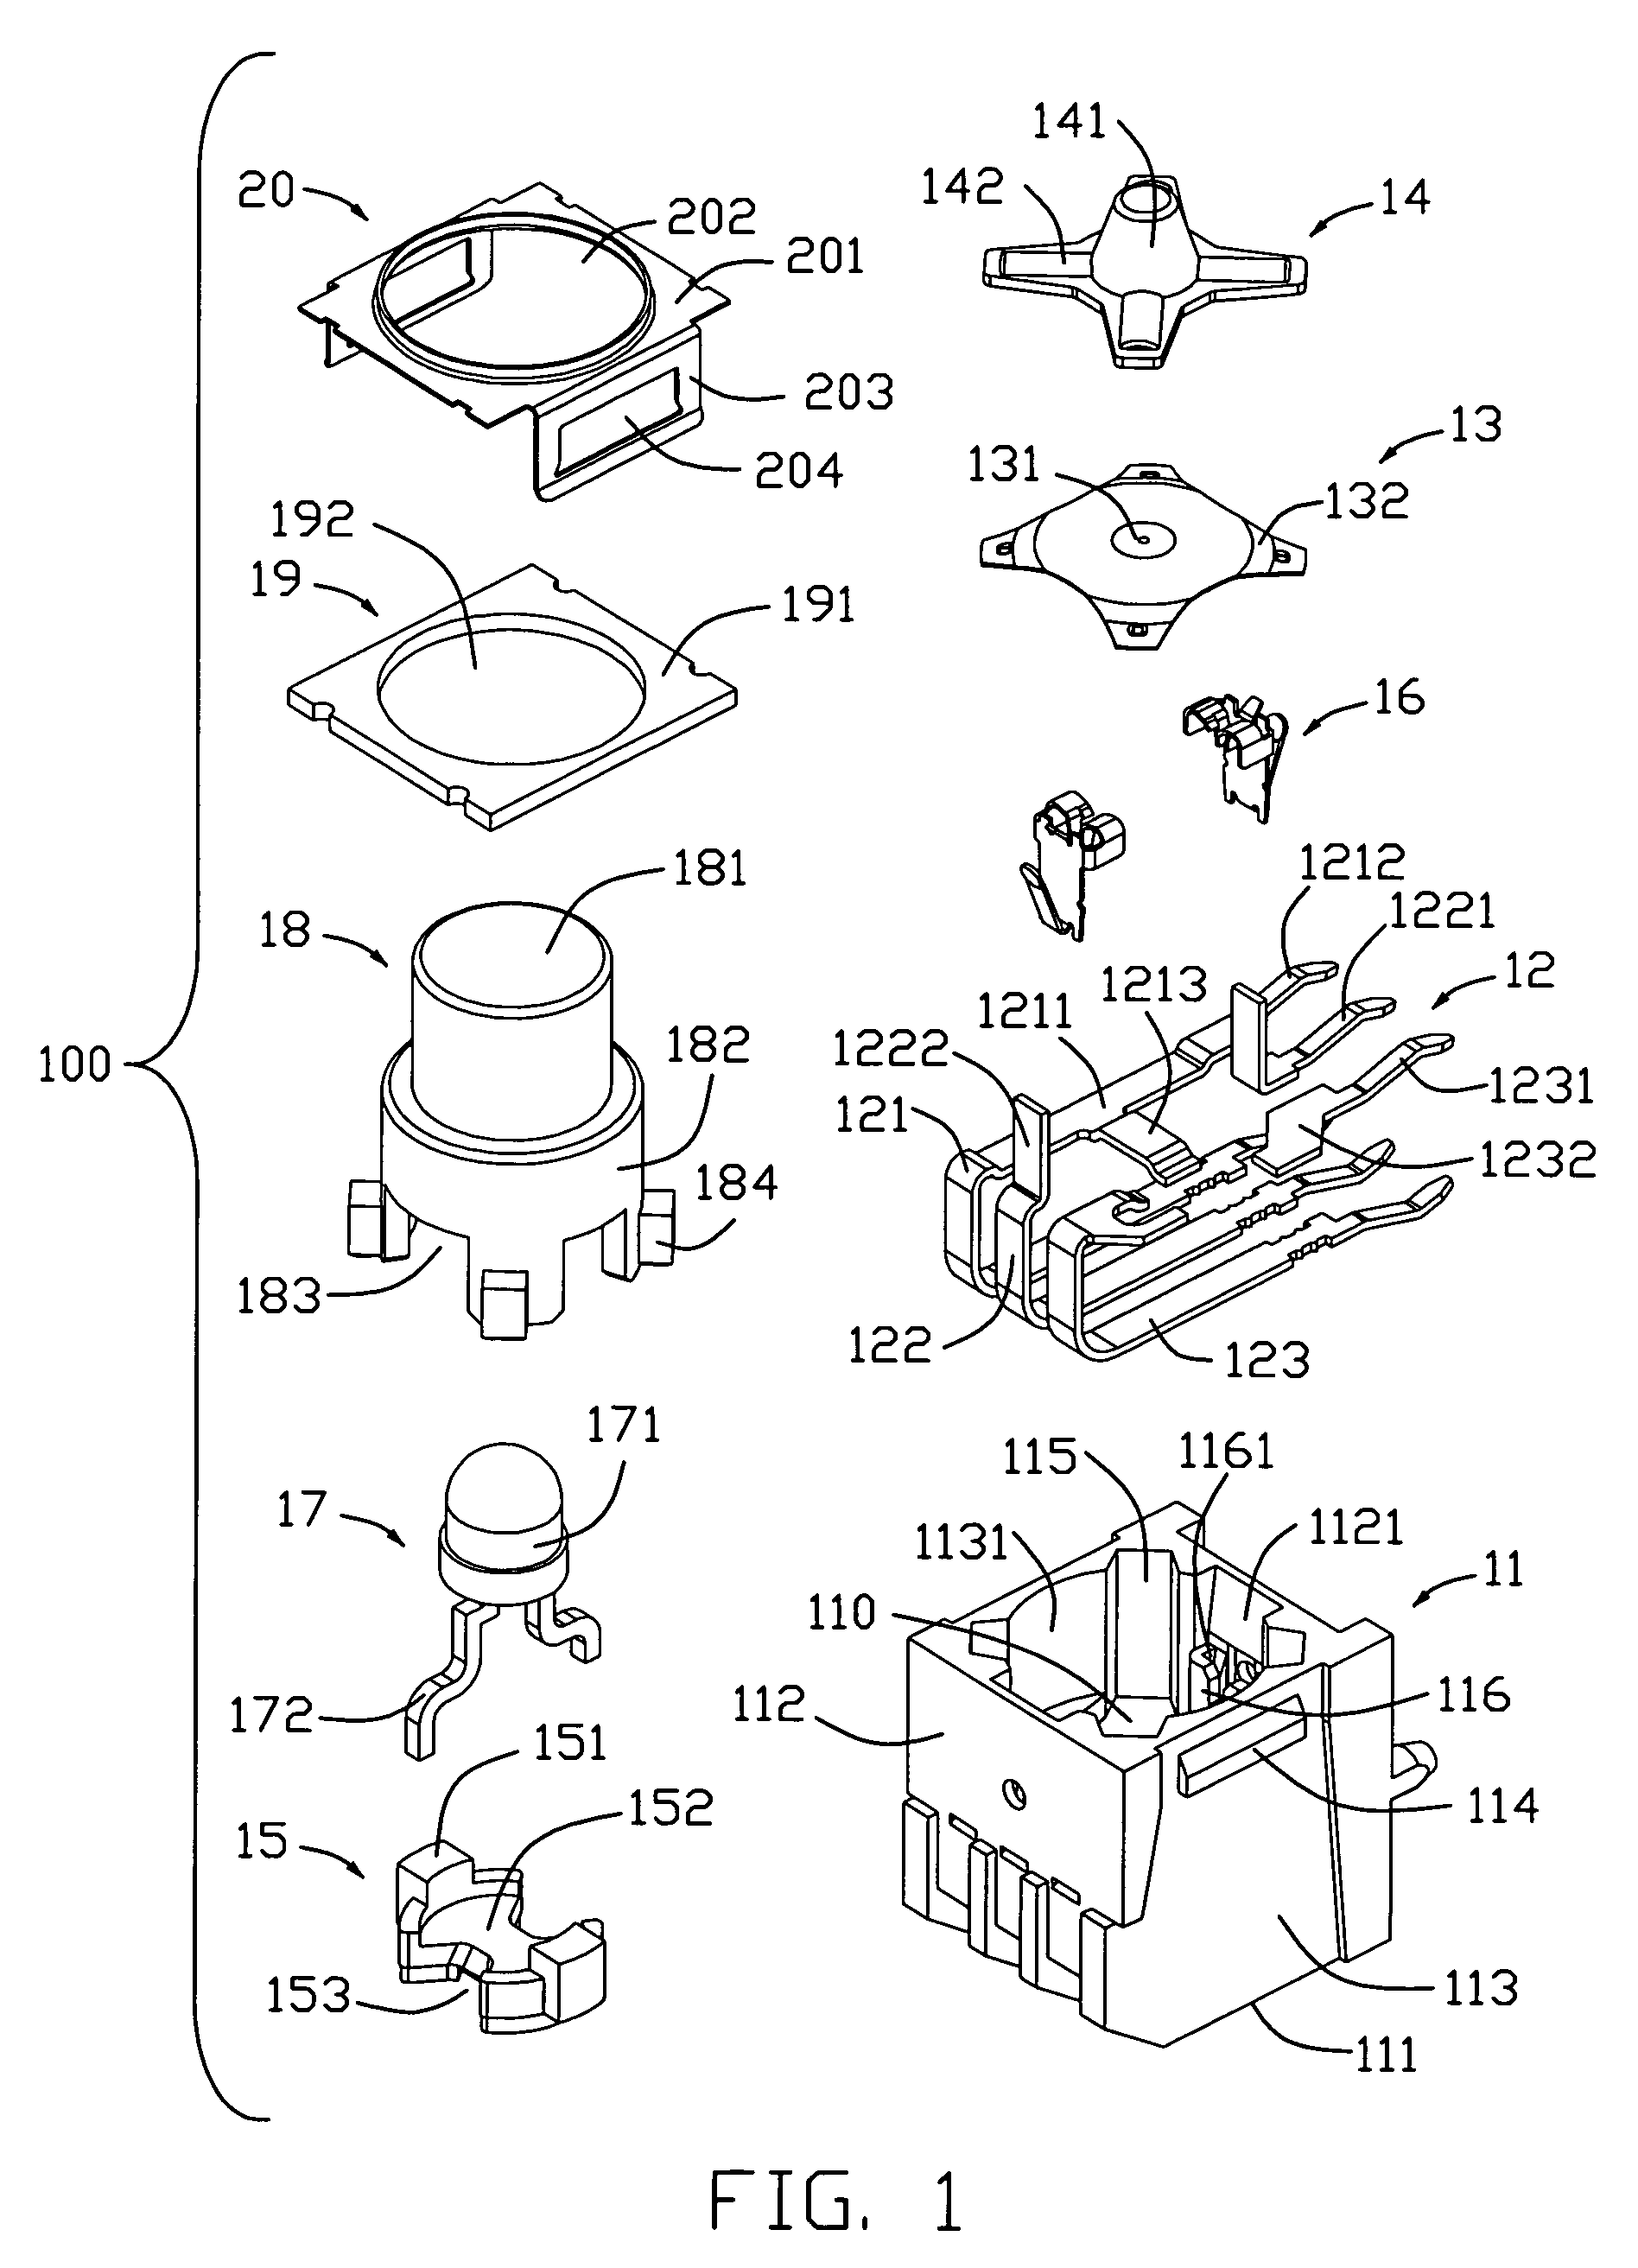 Switch with electrical member supported in elastic folded contact